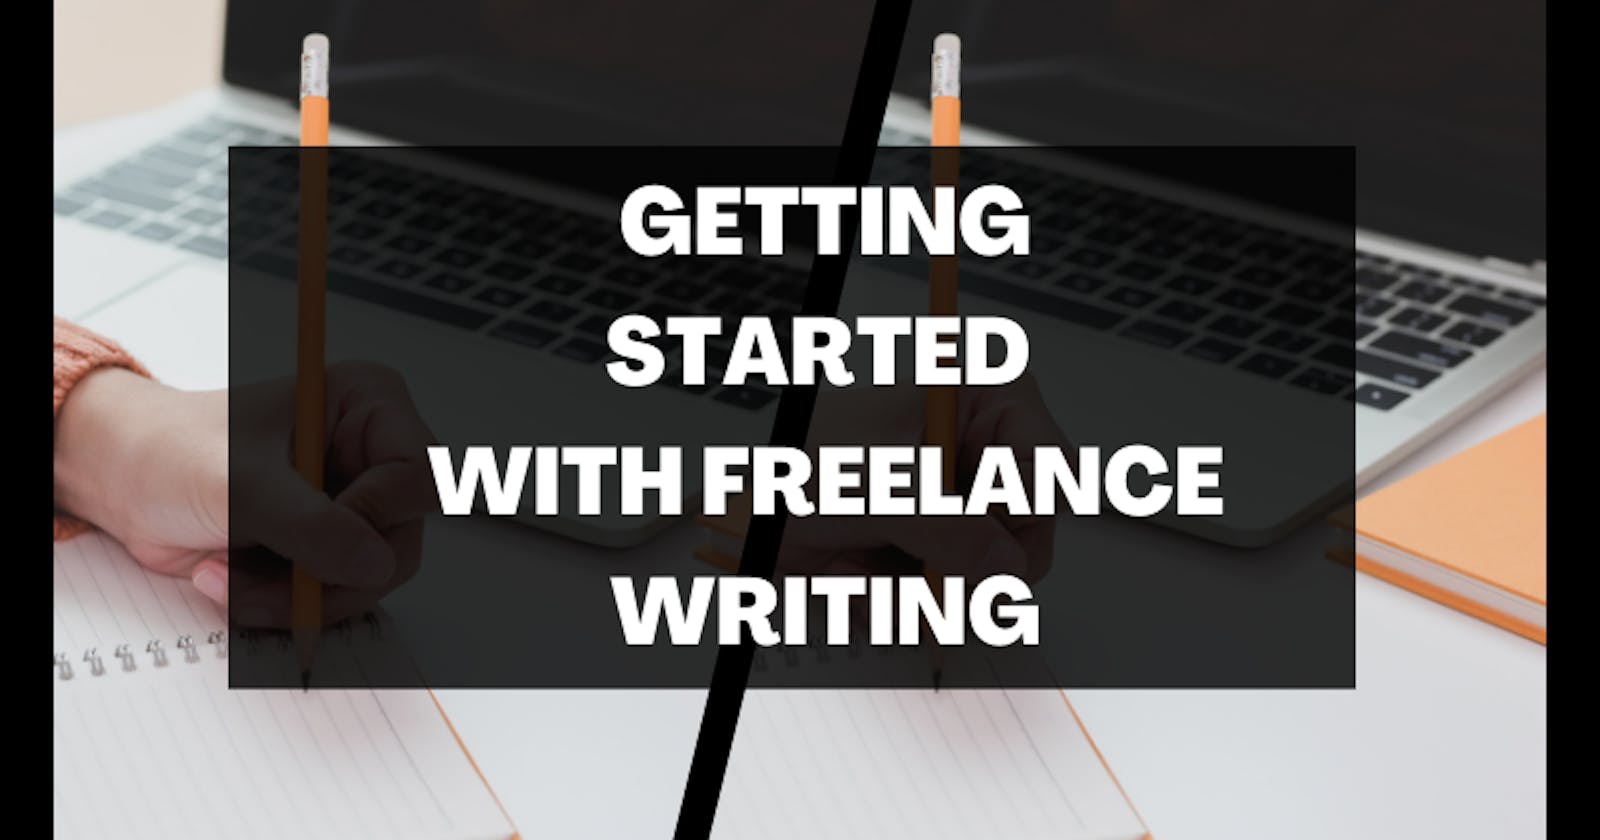 Getting Started With Freelance Writing